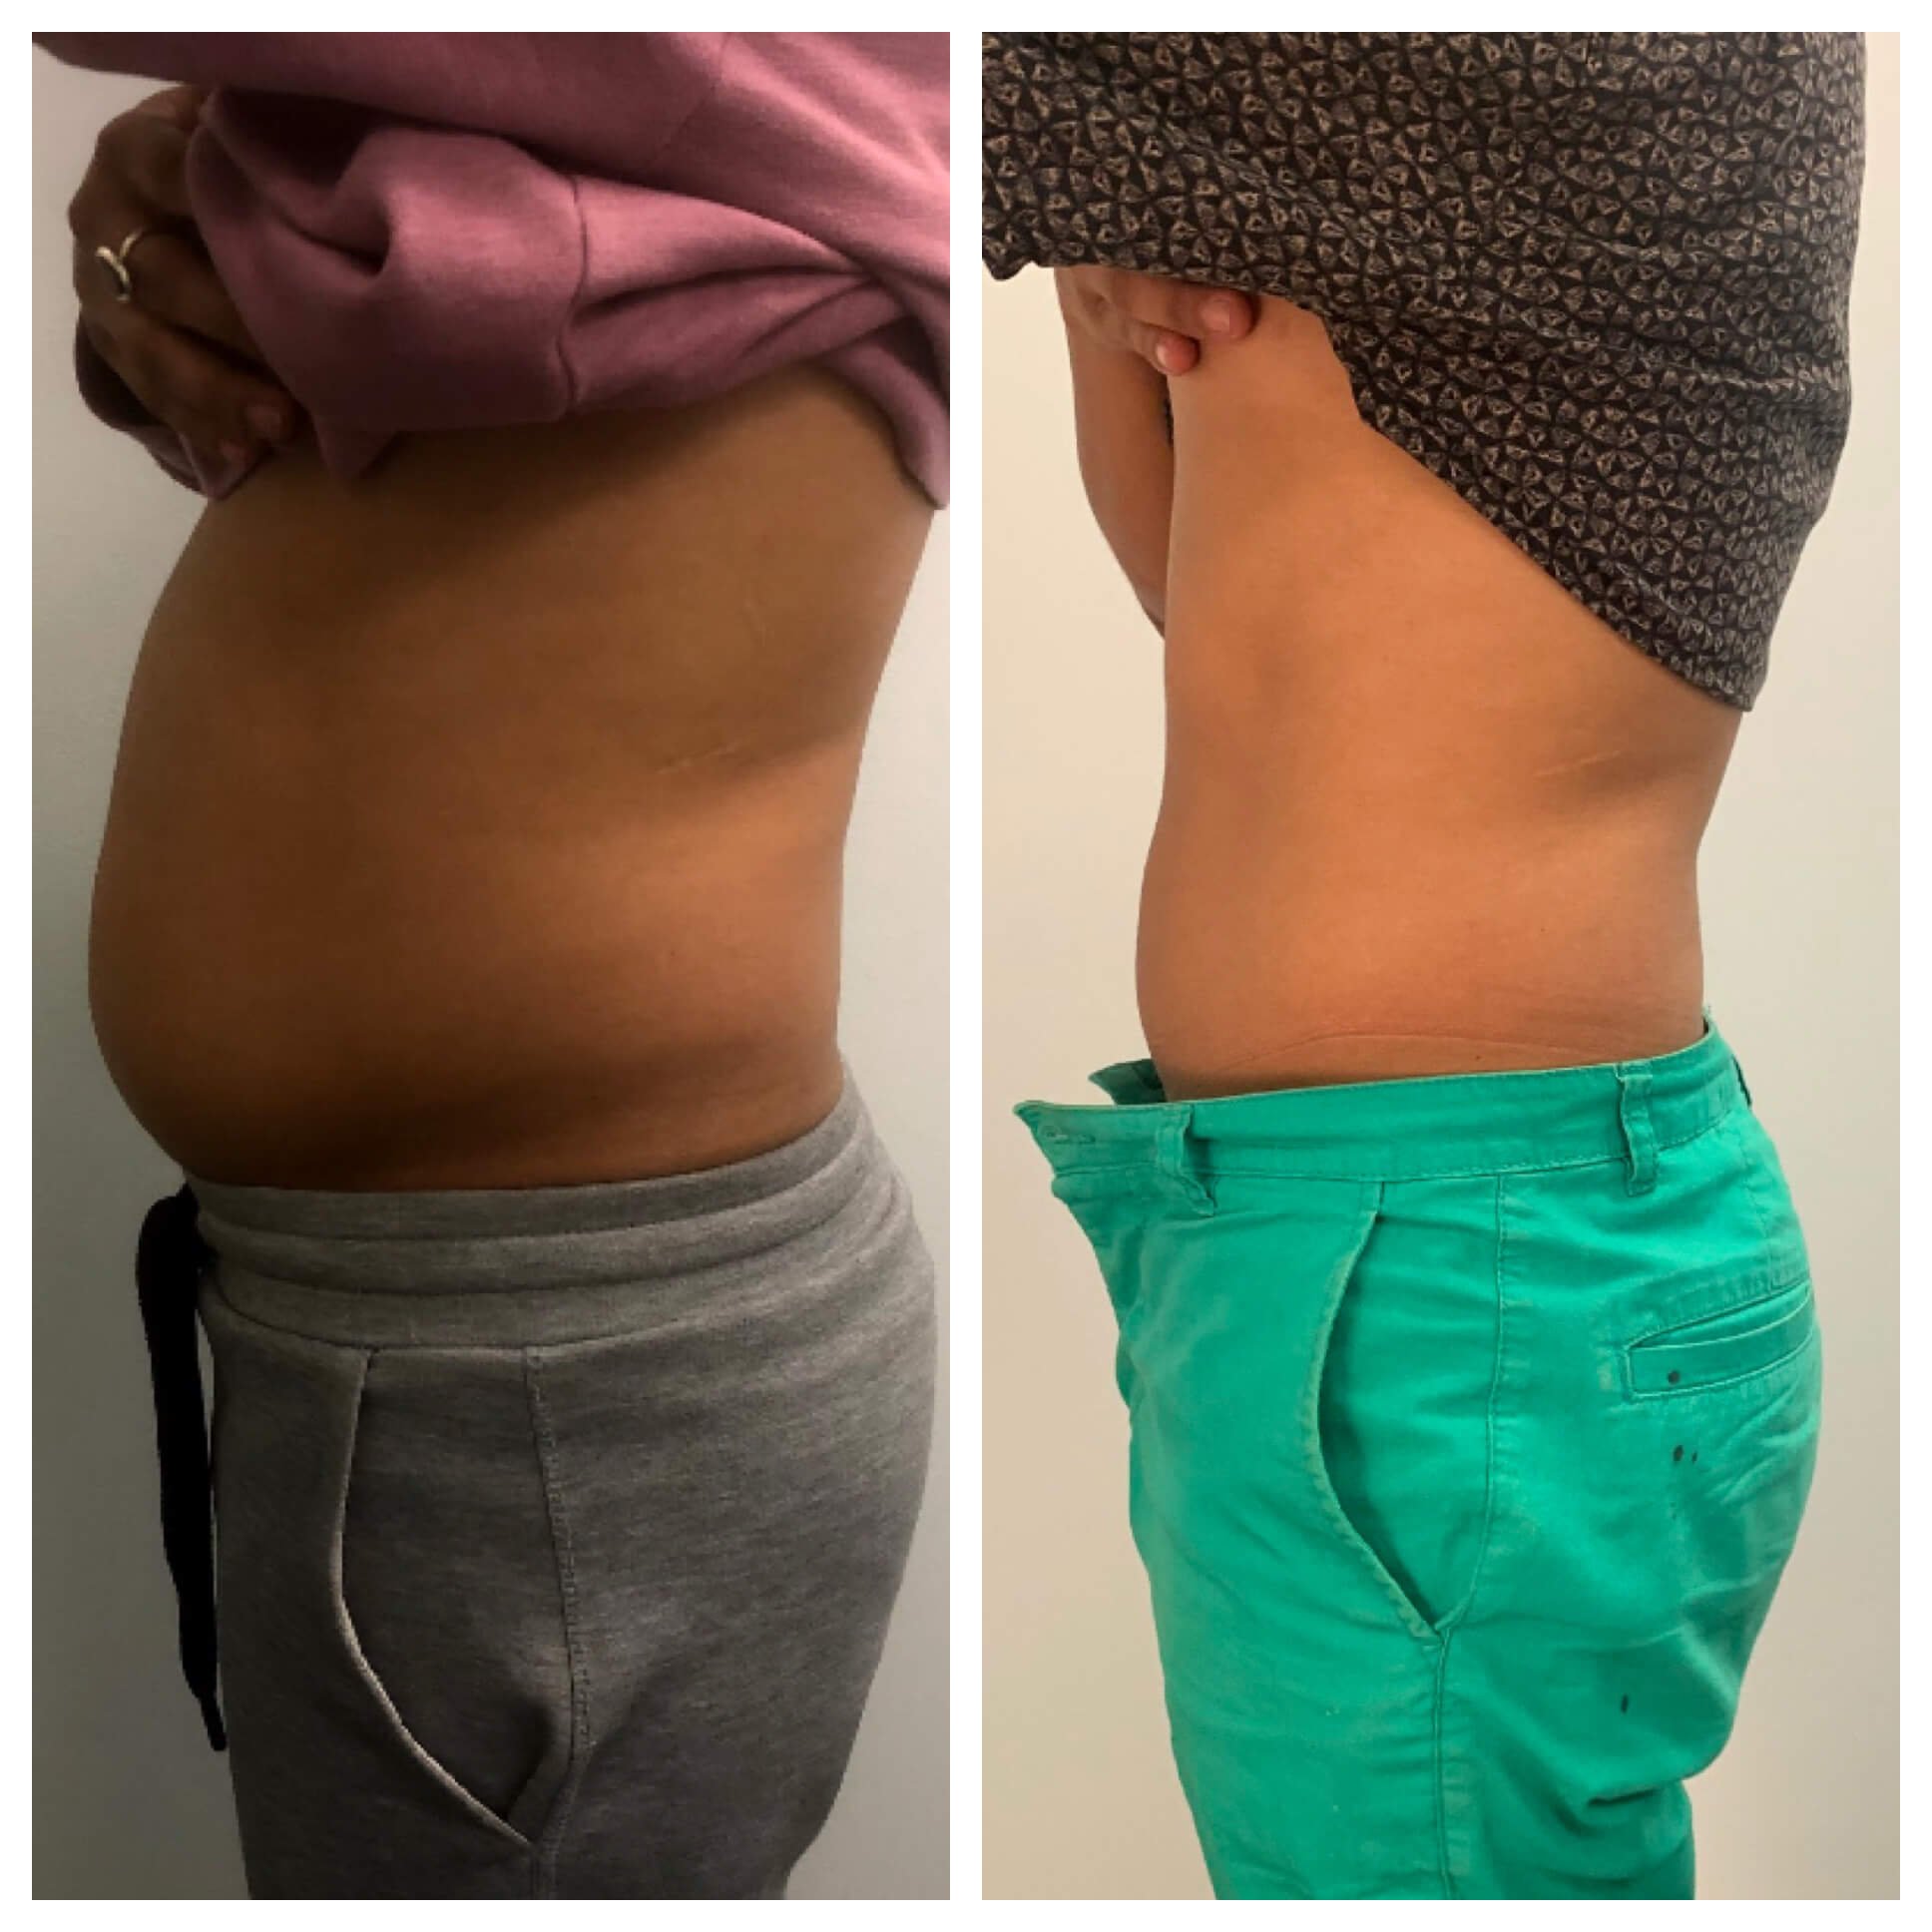 8-slimming-sessions-give-credit-to-@thrivecryostudio.jpg